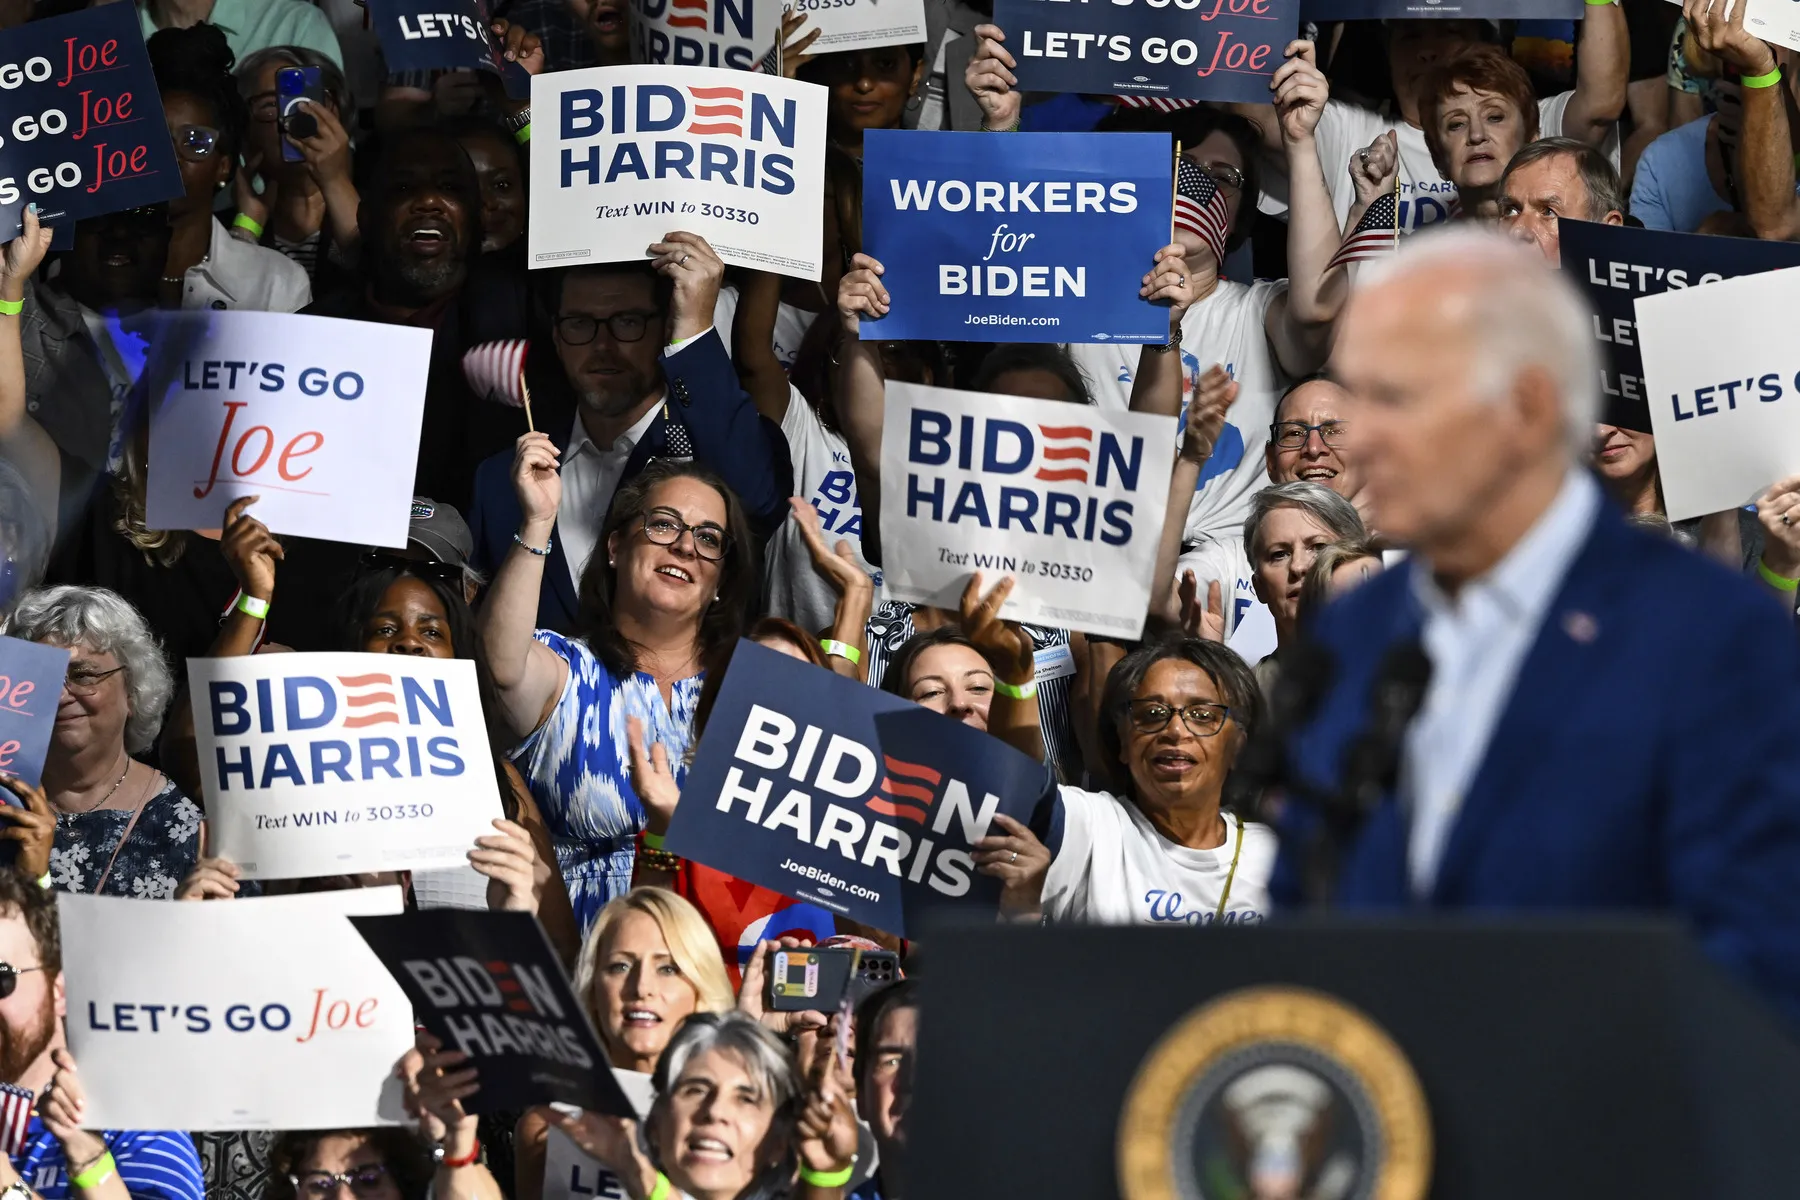 Supporters cheer as President Joe Biden speaks at a campaign rally.